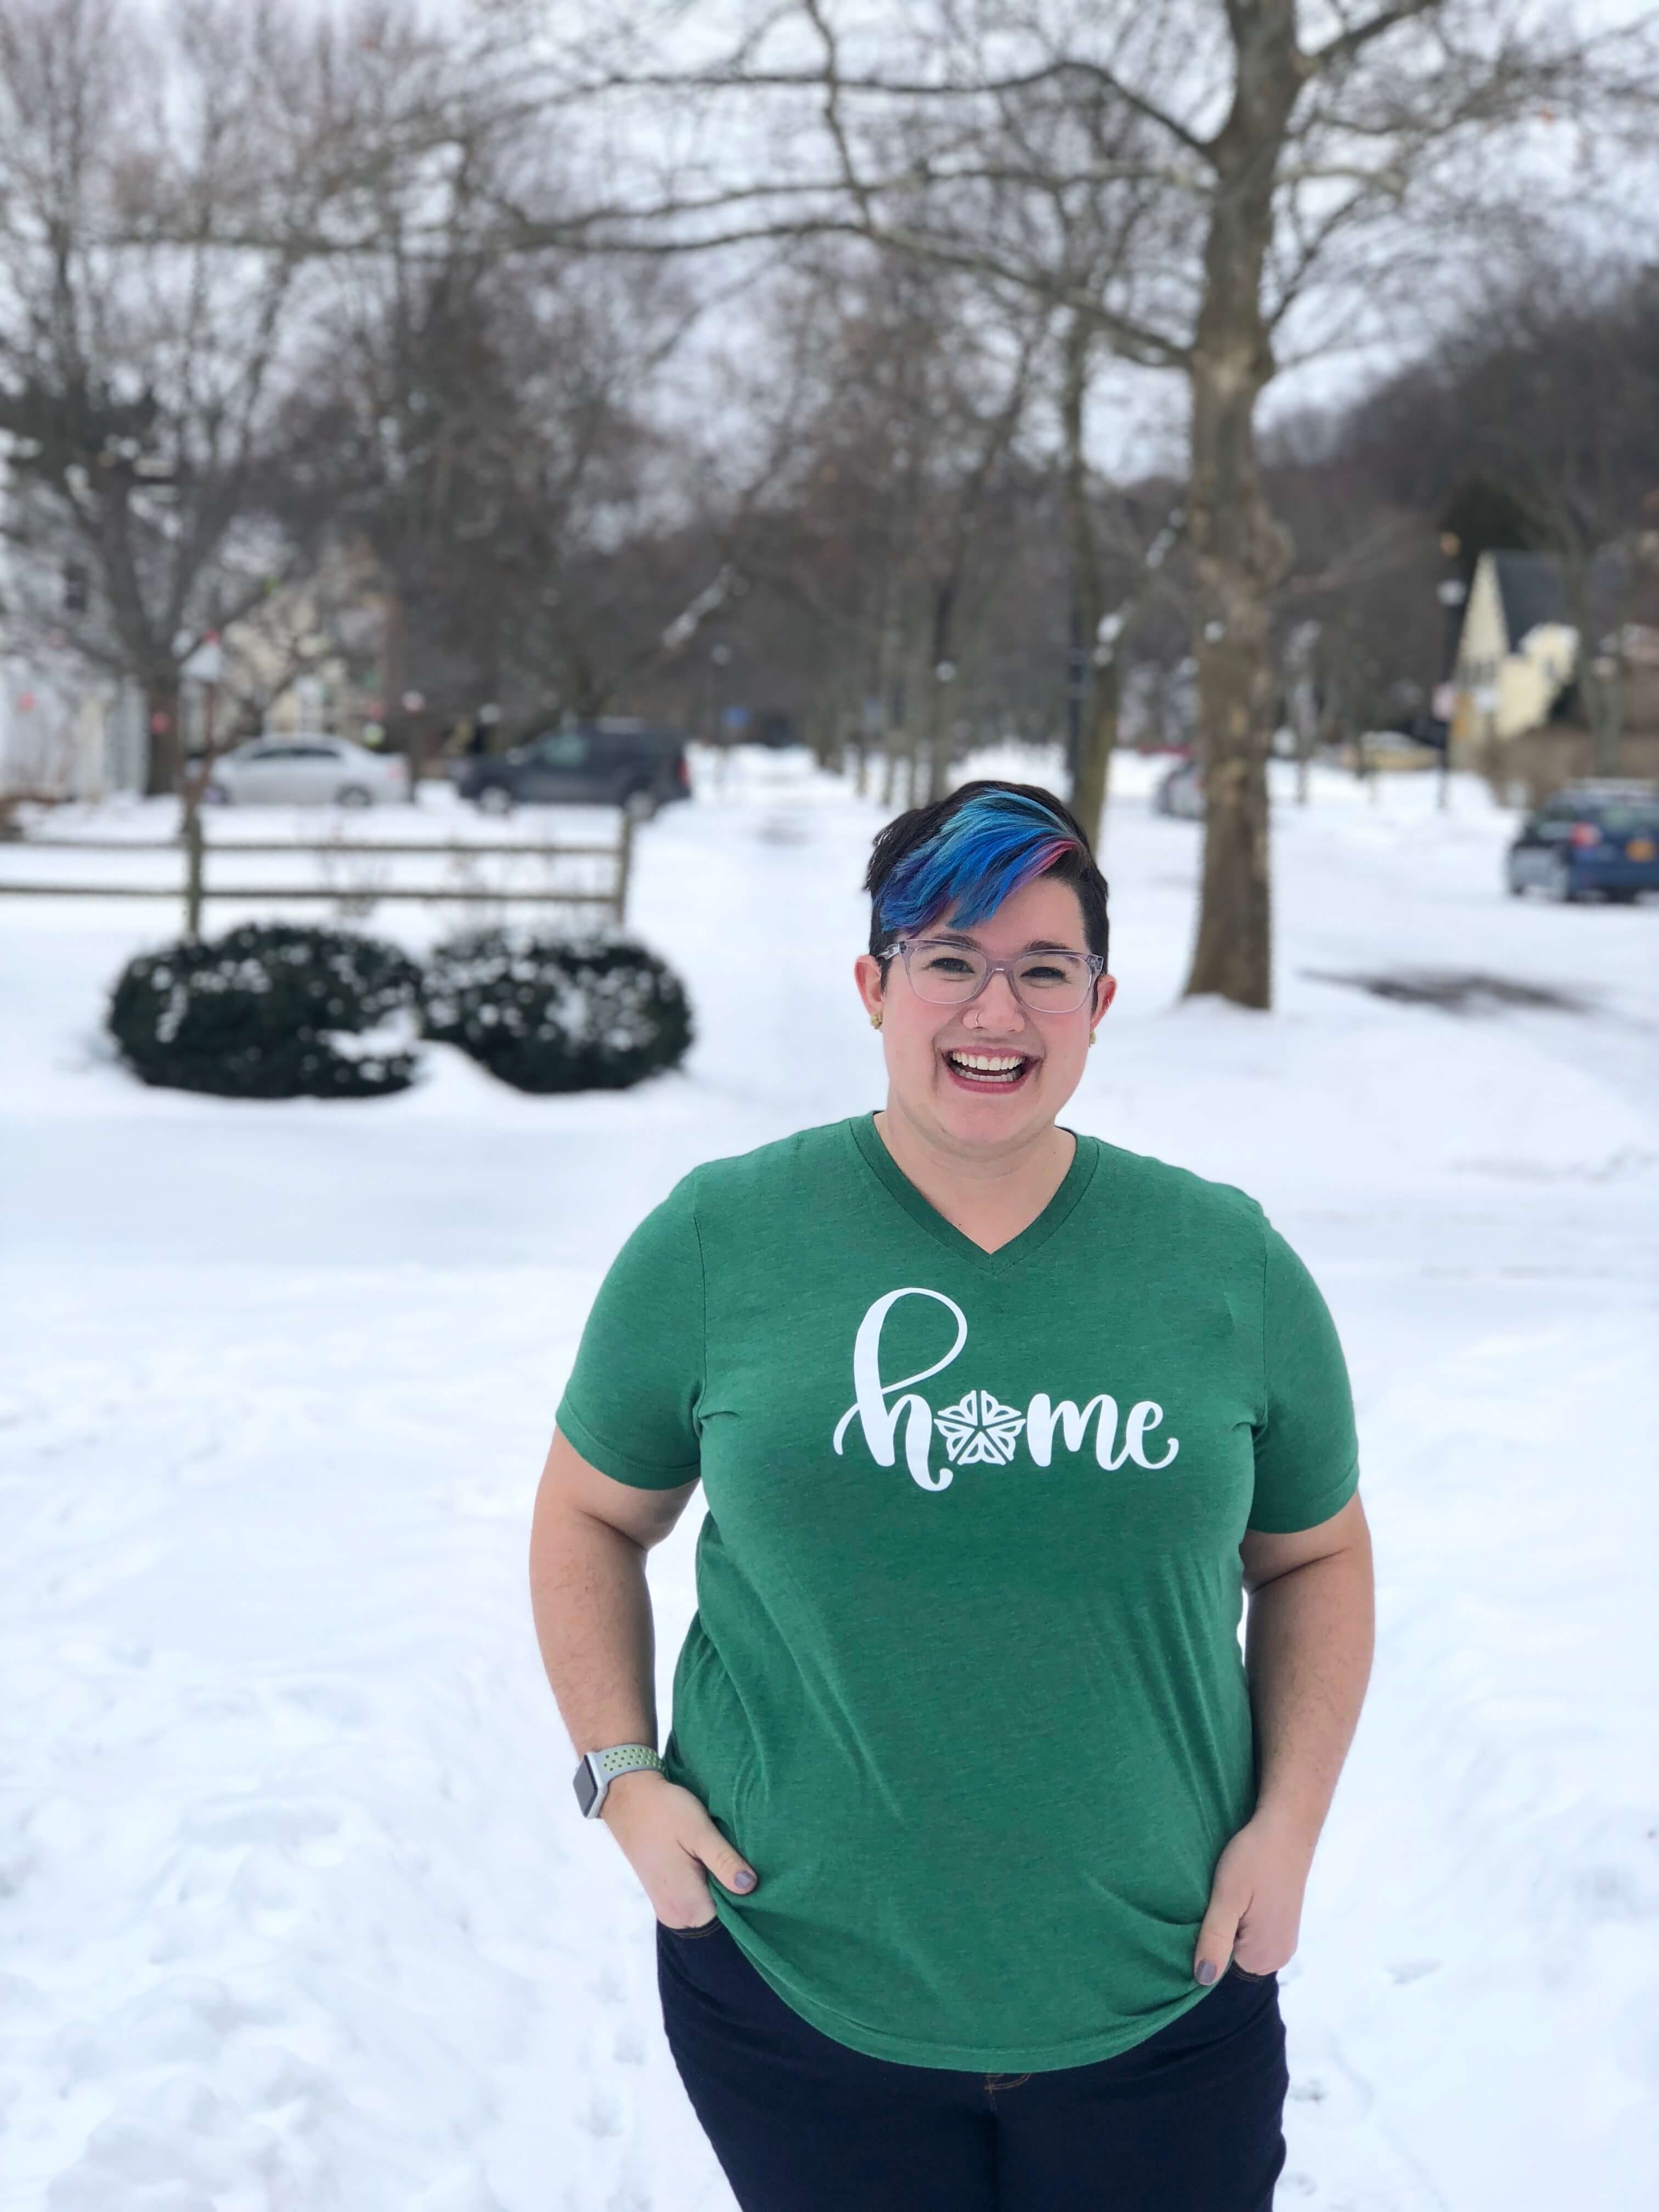 Artist and Maker Anna Vos of Owl Post Lettering loves Rochester’s small community feel